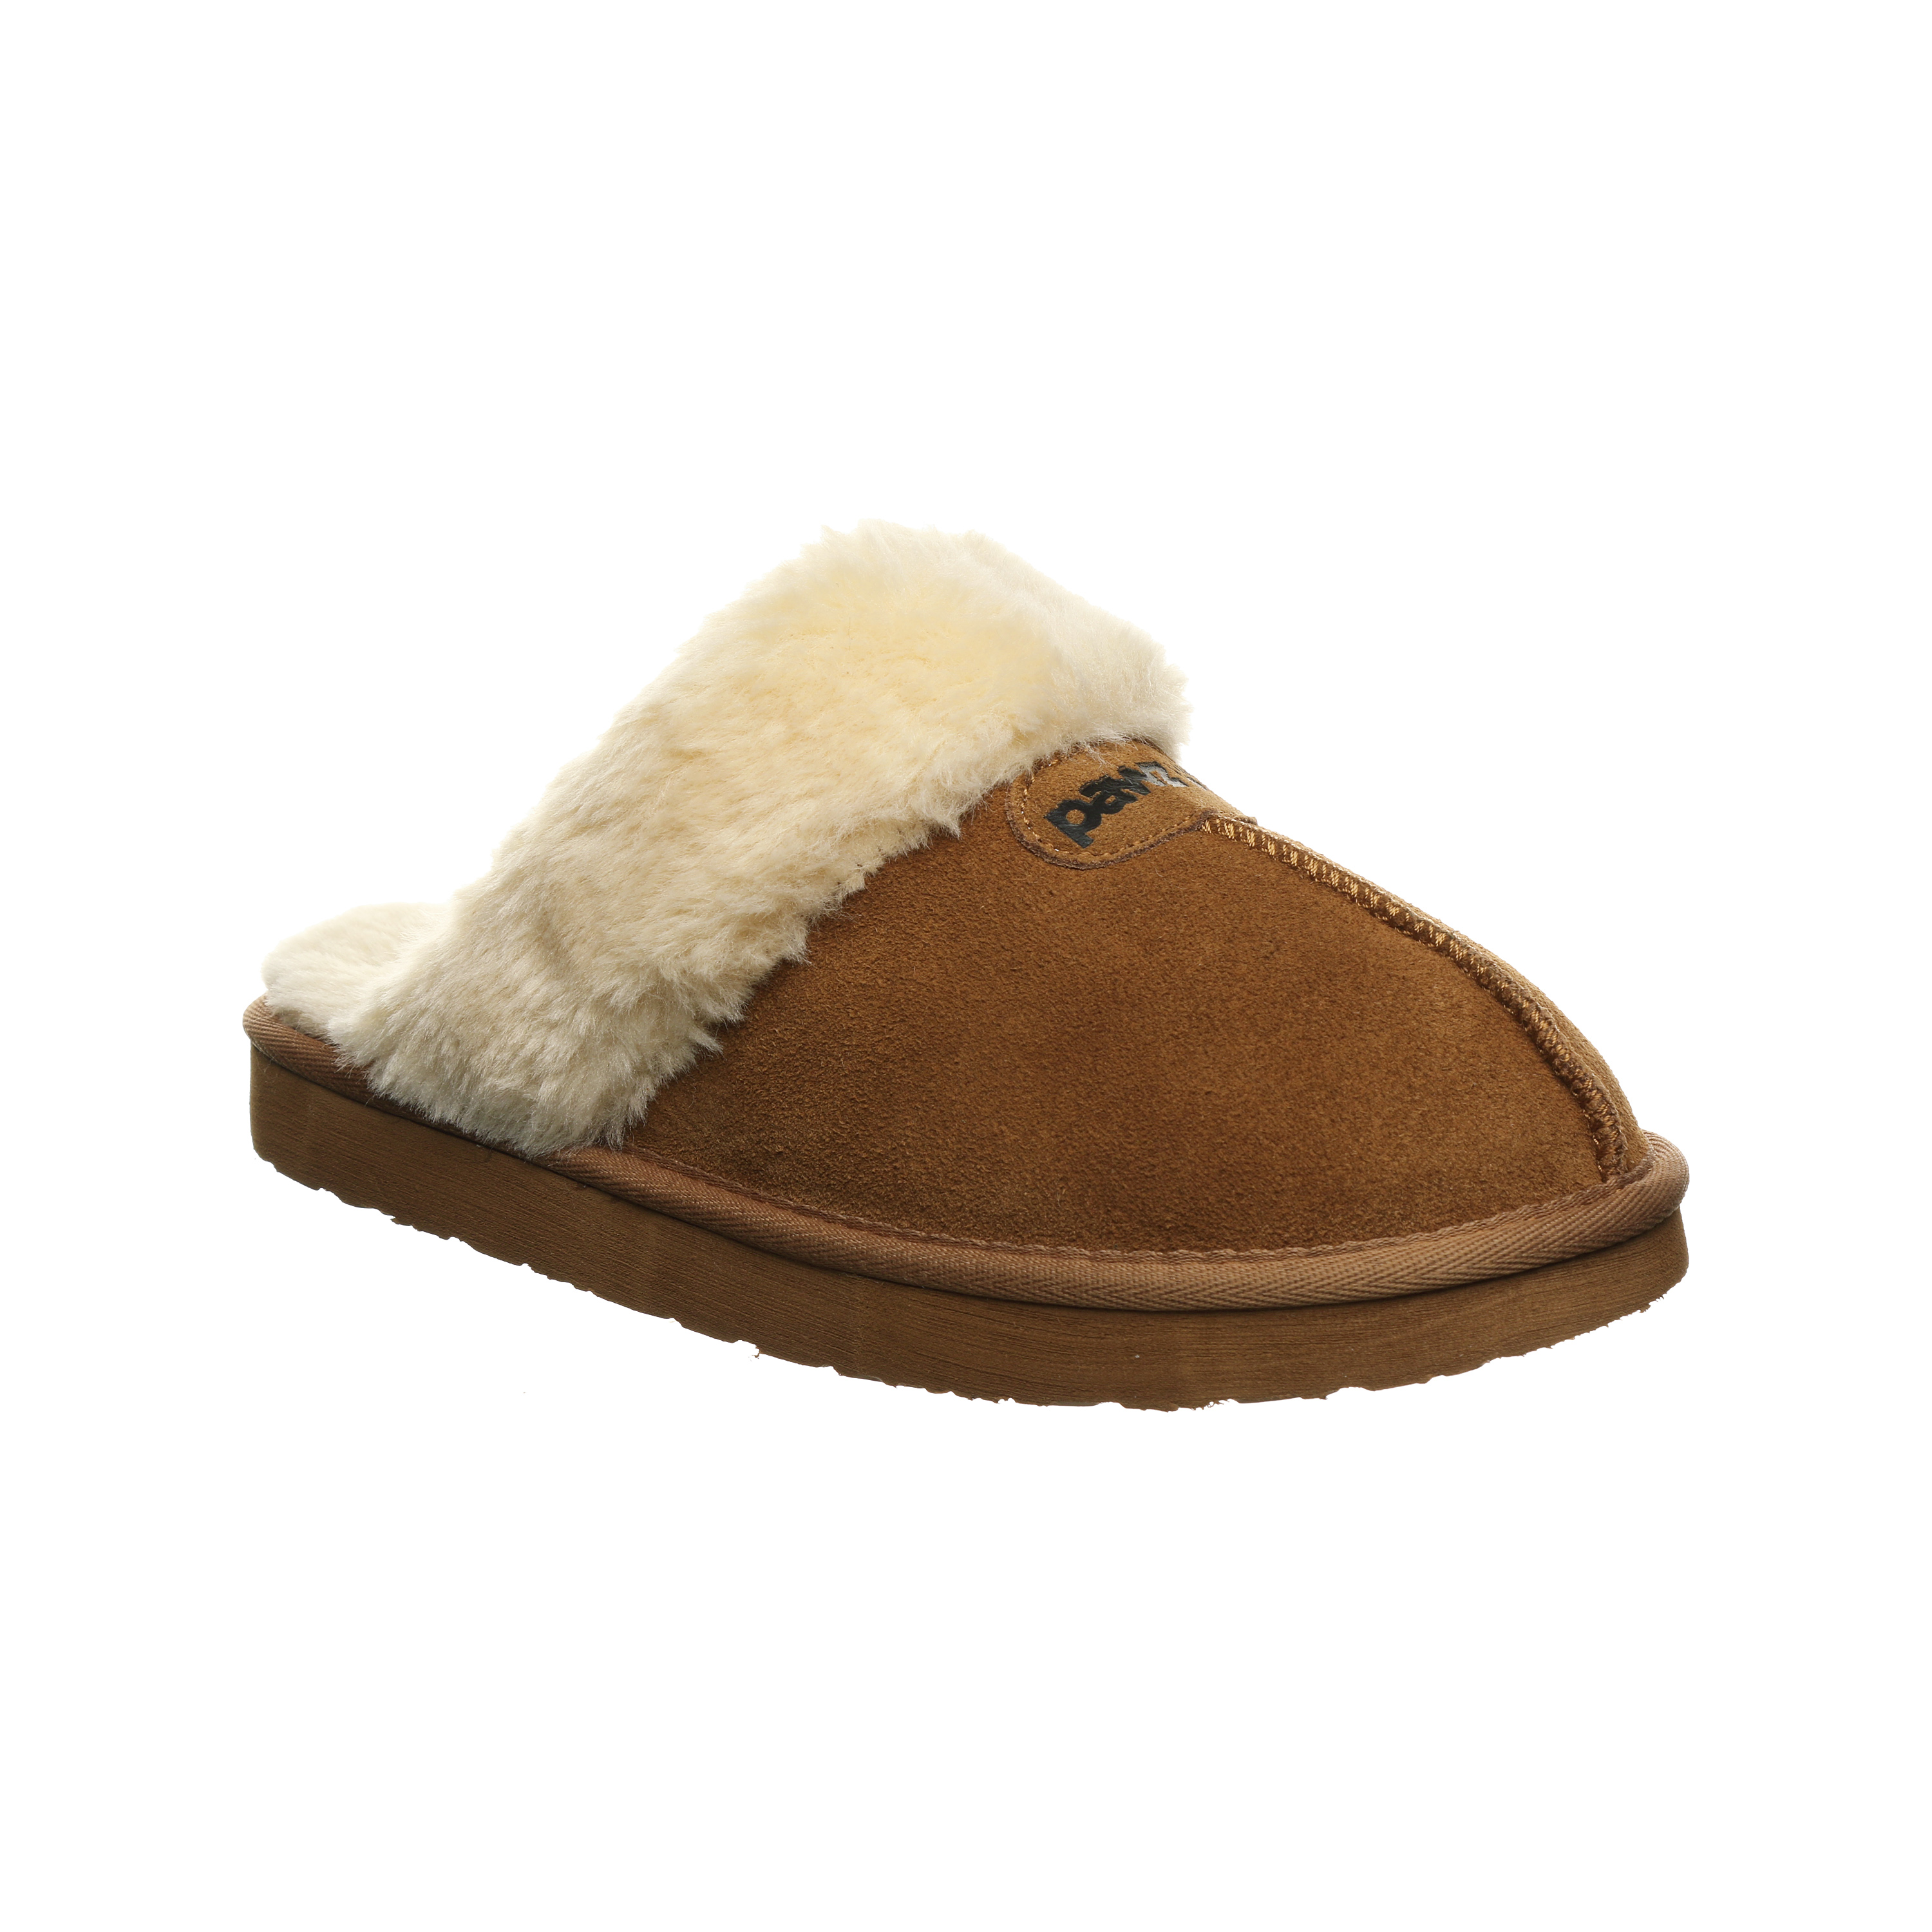 Pawz by Bearpaw Meredith Faux Fur Lined Suede Scuff Slipper (Women's) - image 1 of 15